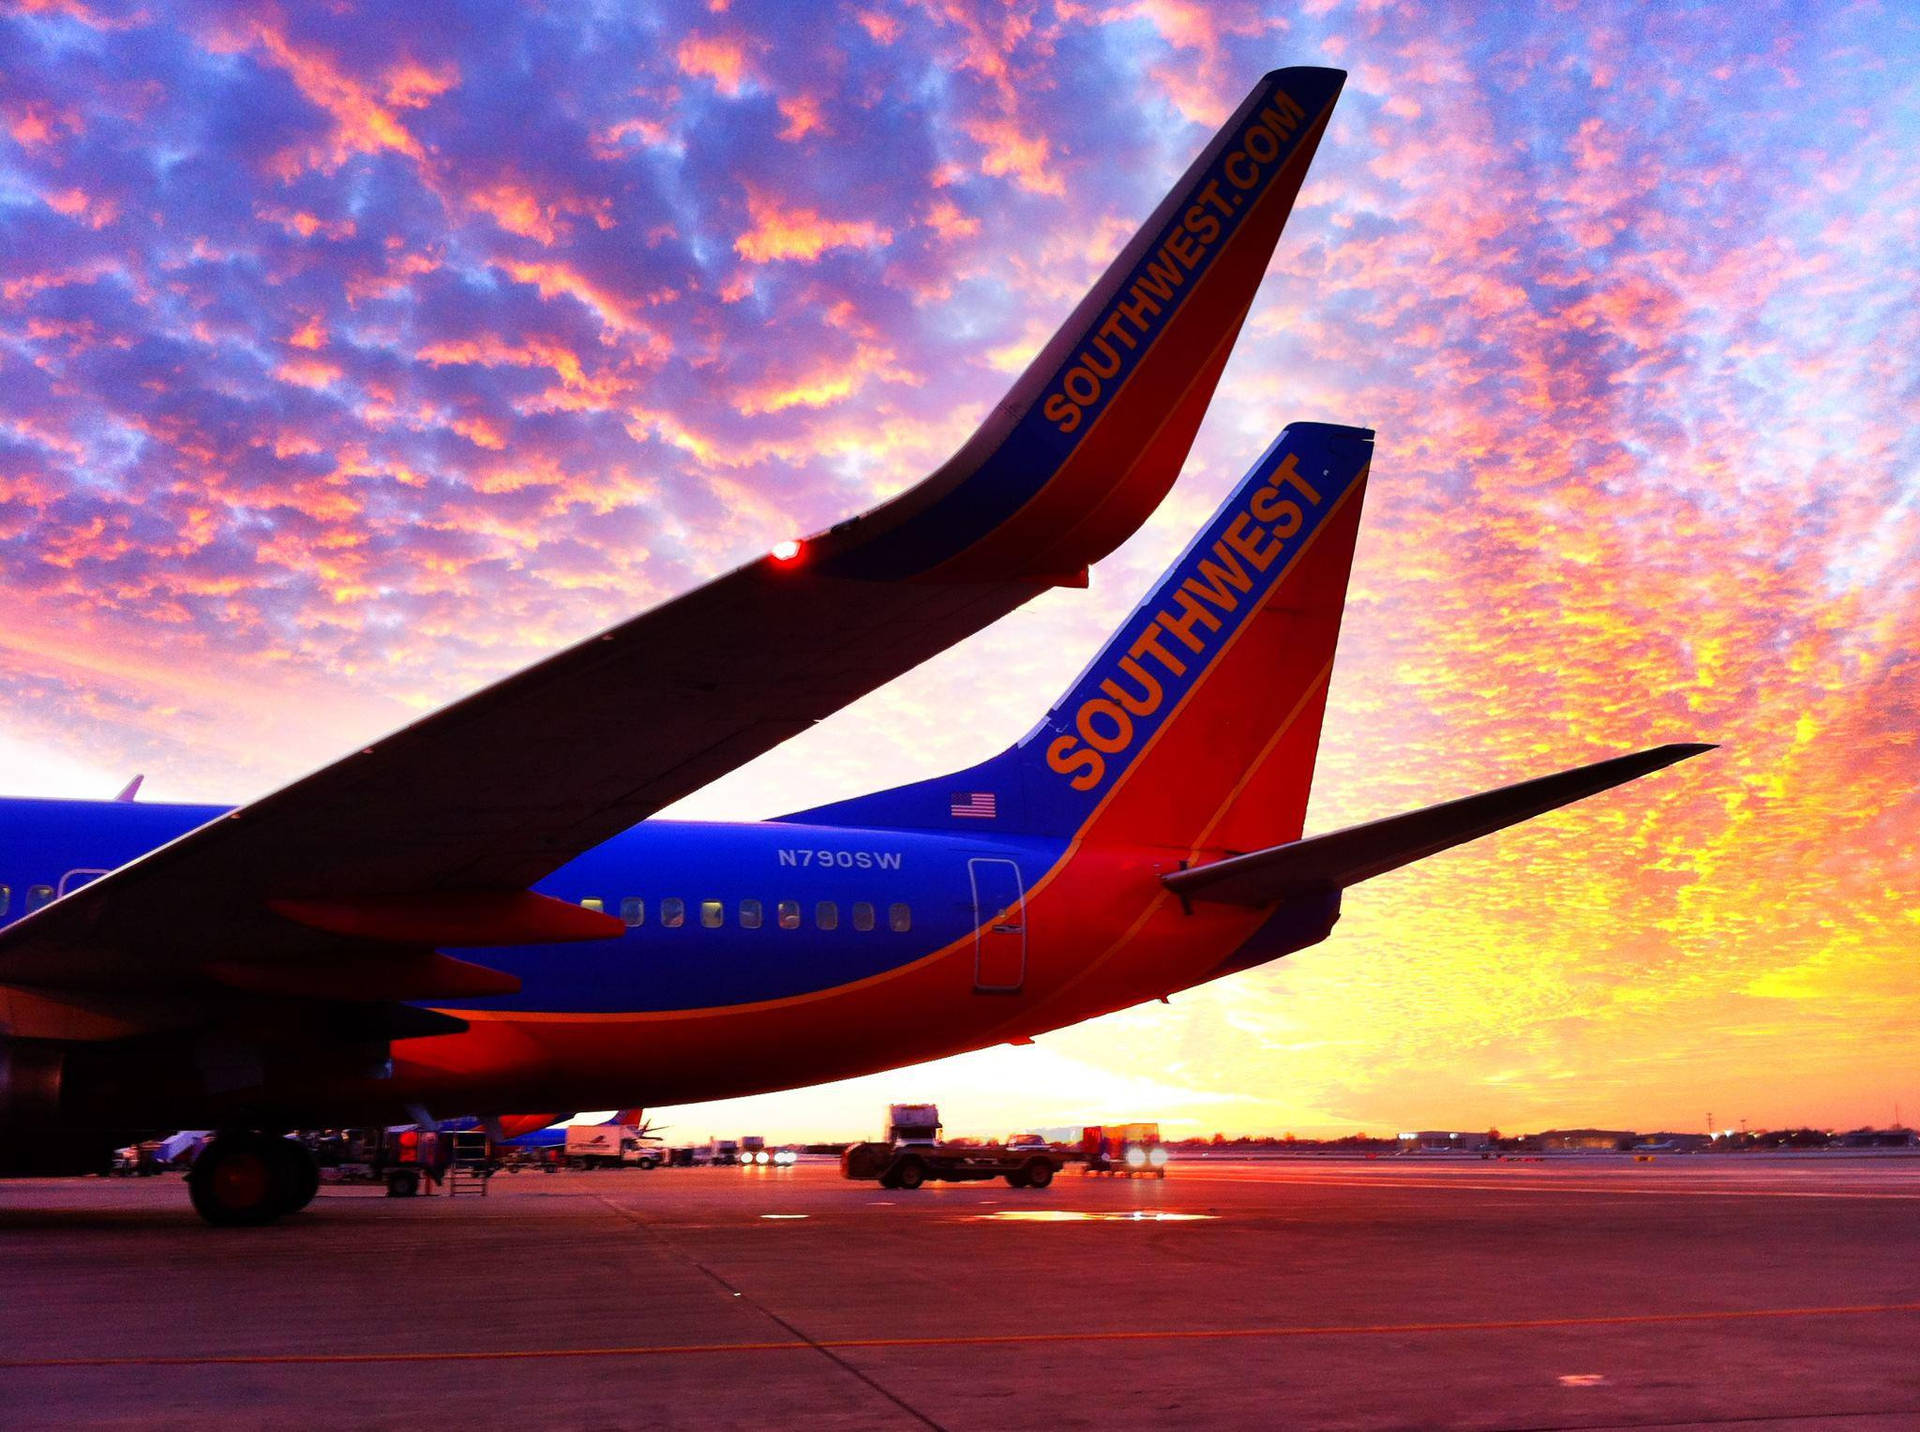 Southwest Airlines Airplane At Dusk Wallpaper